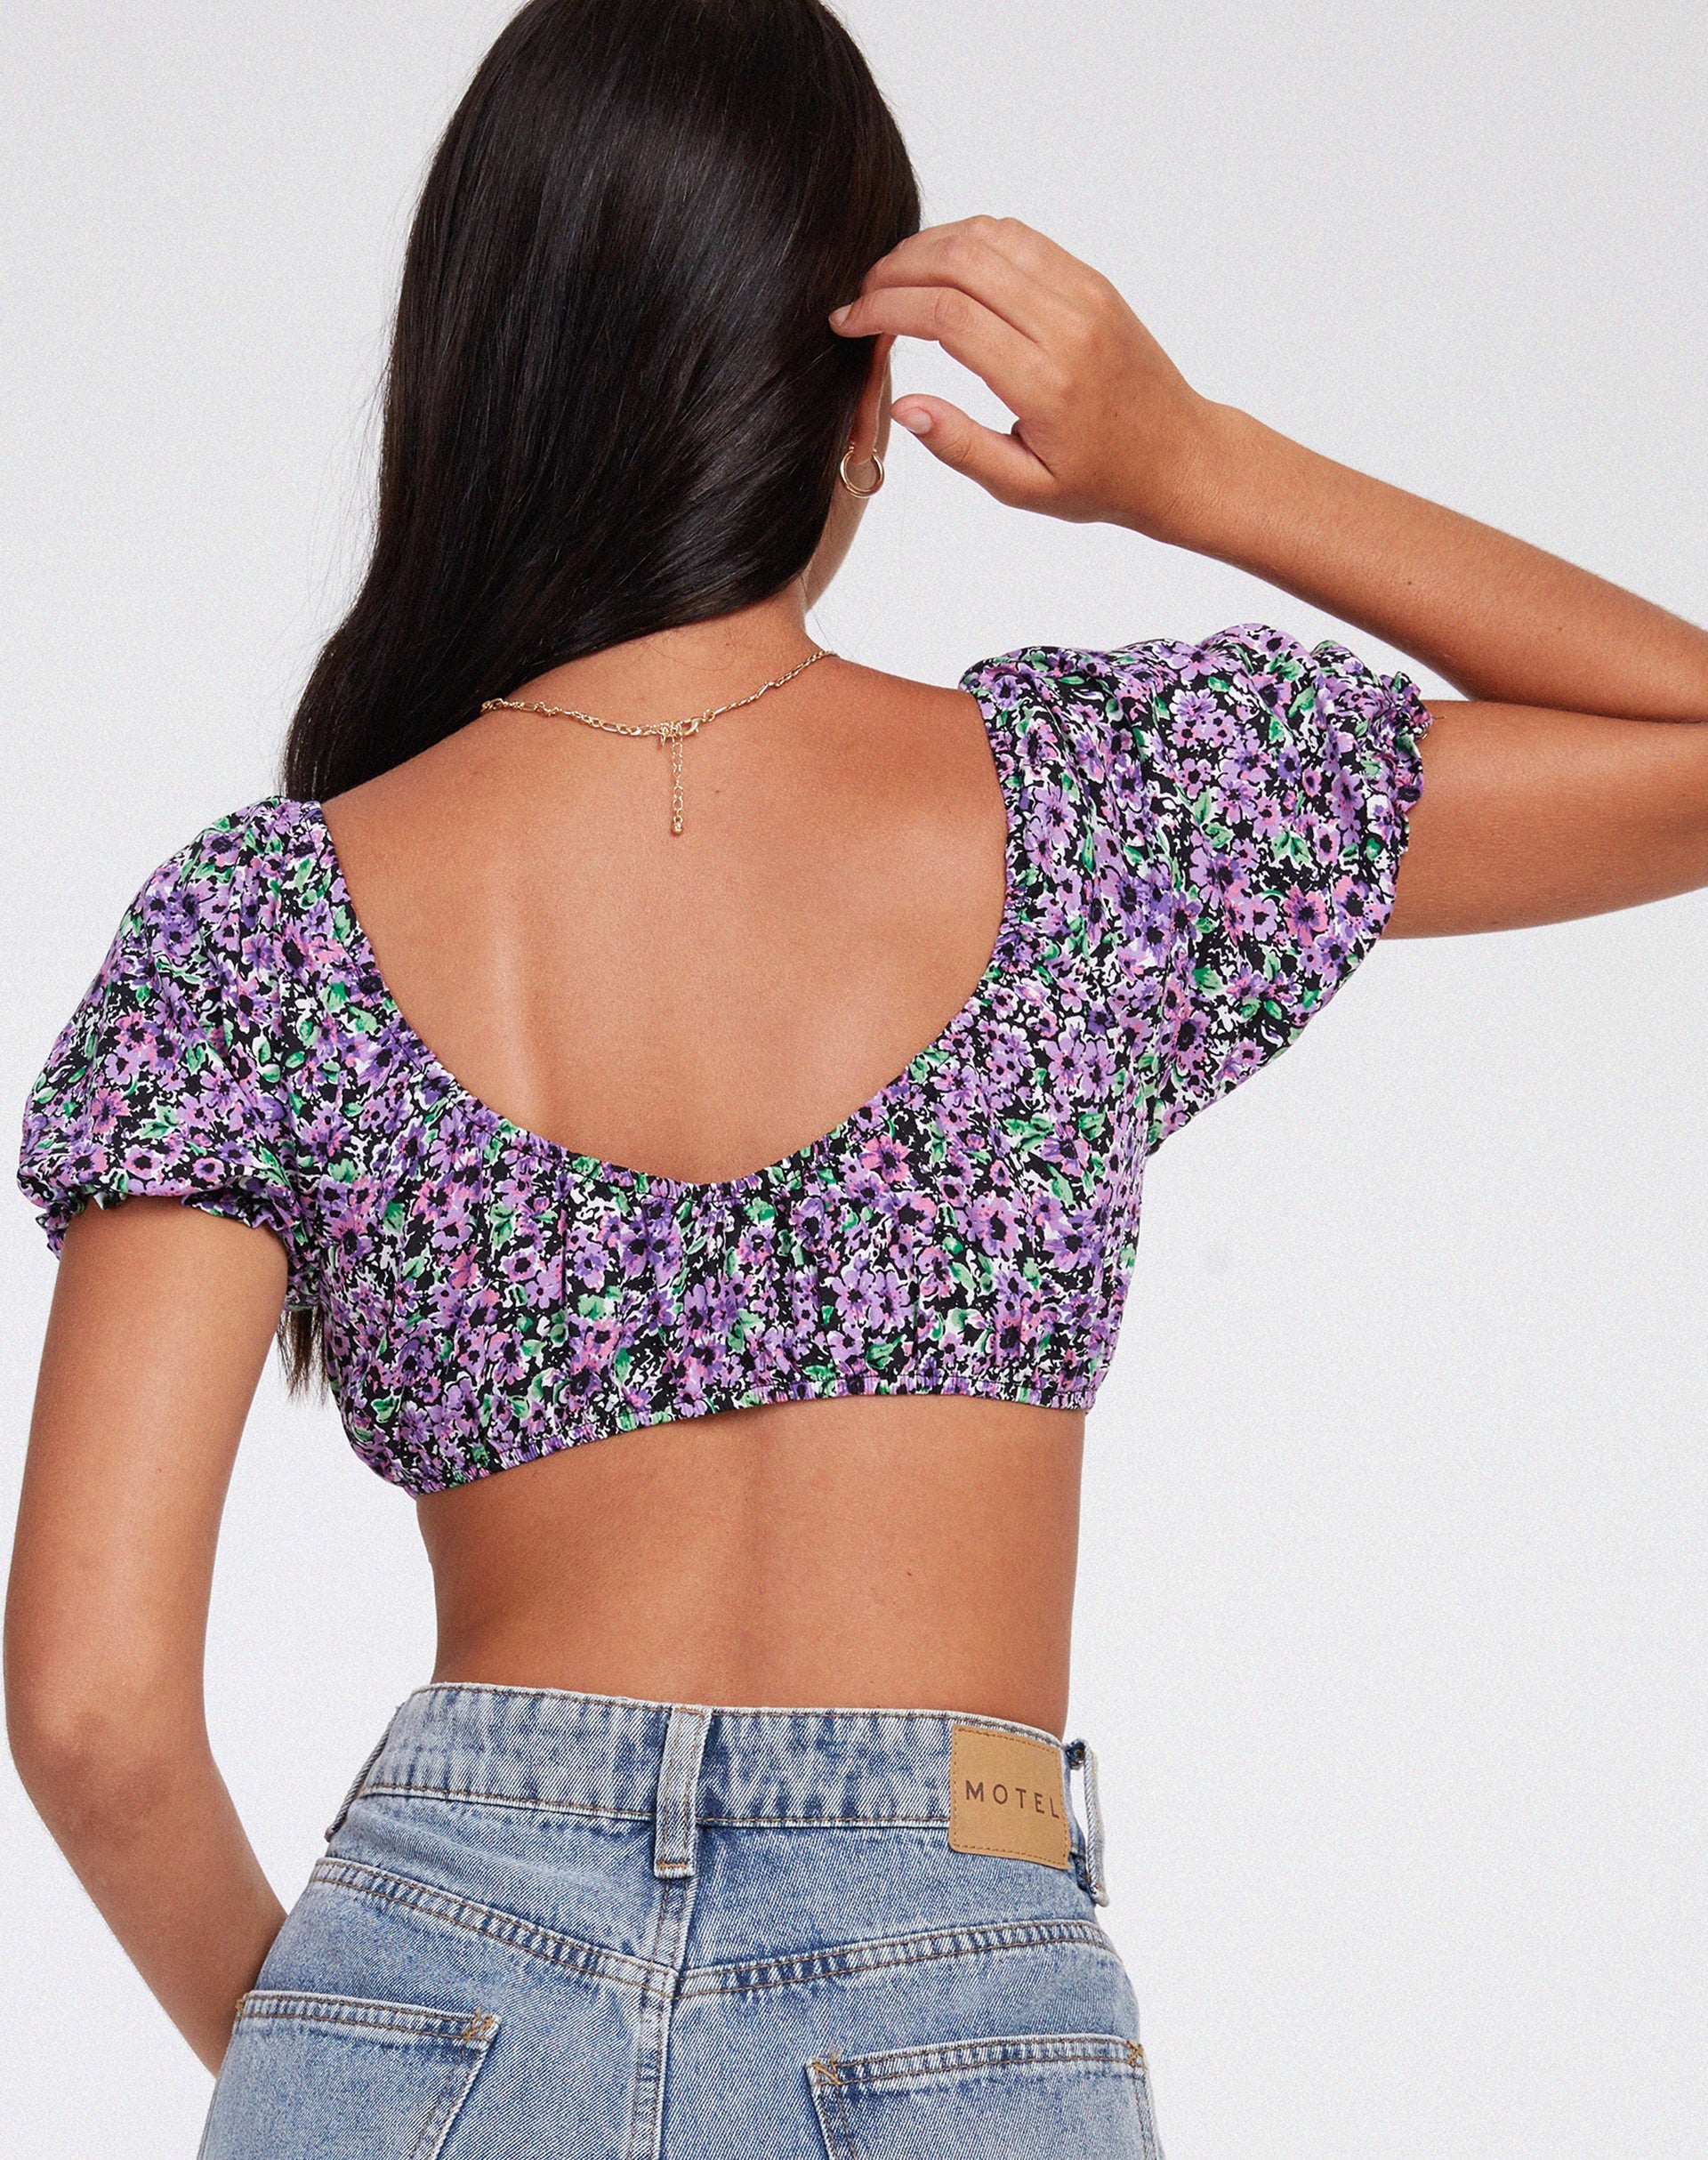 image of Haenji Crop Top in Lilac Blossom